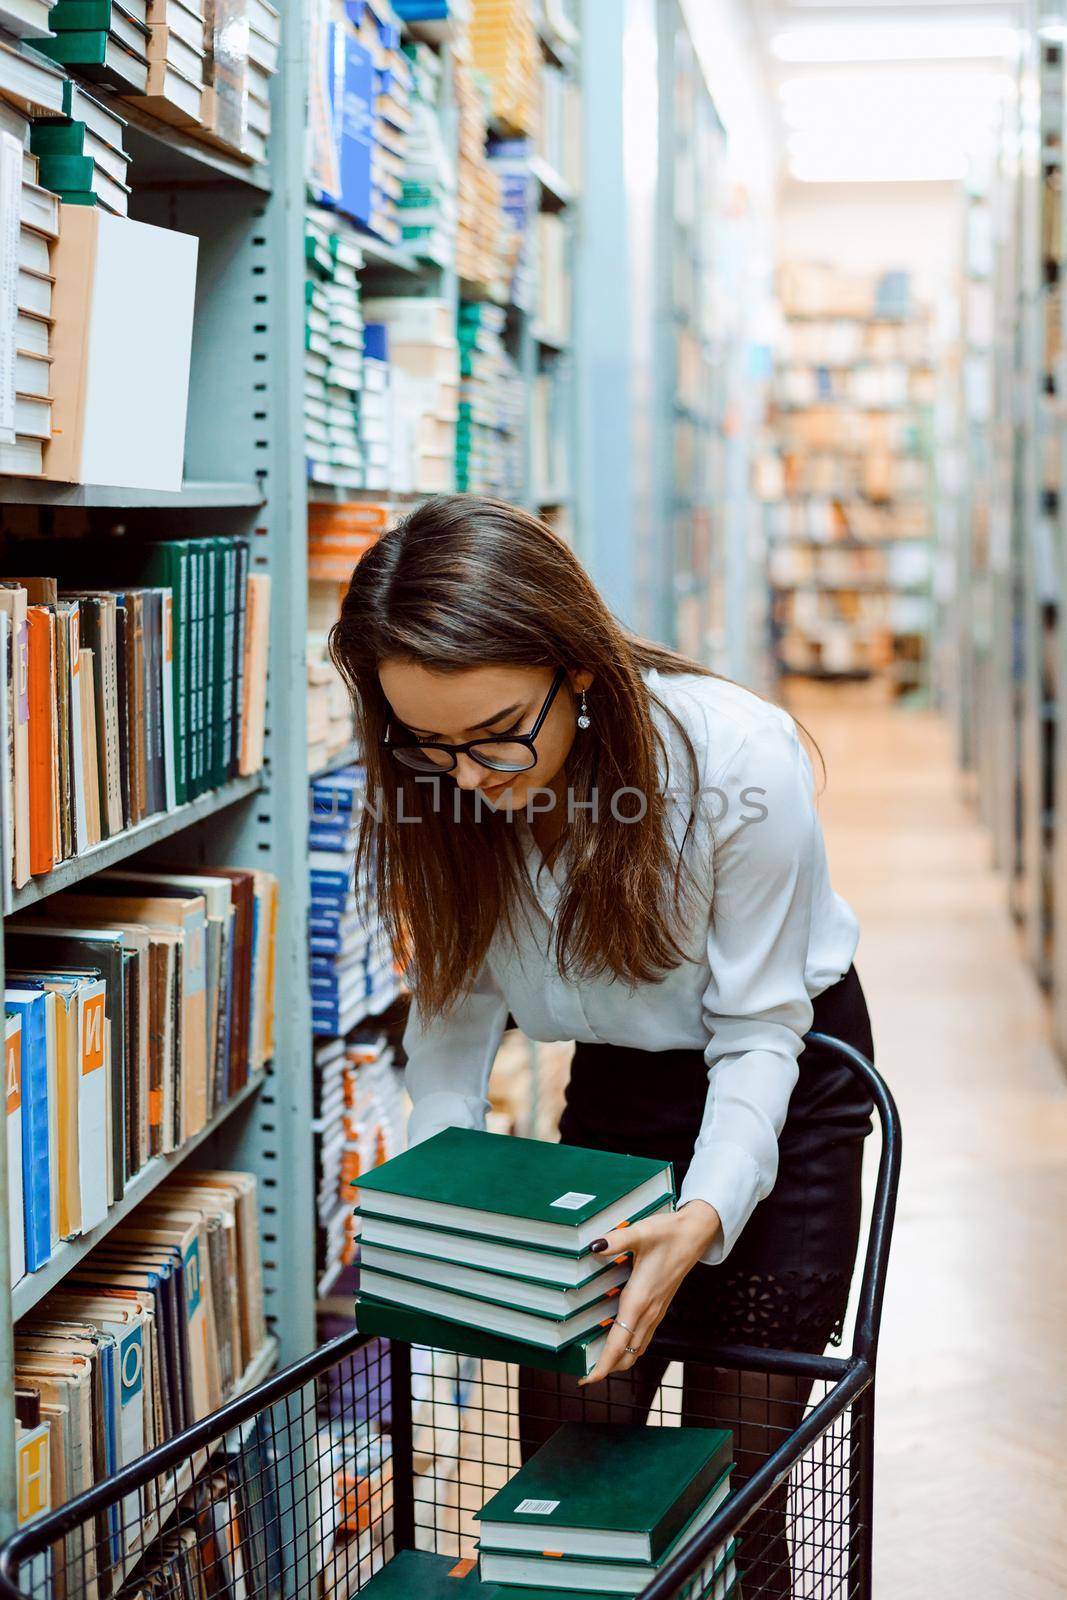 Librarian puts piles of new books to the shelves of the library, doing her job